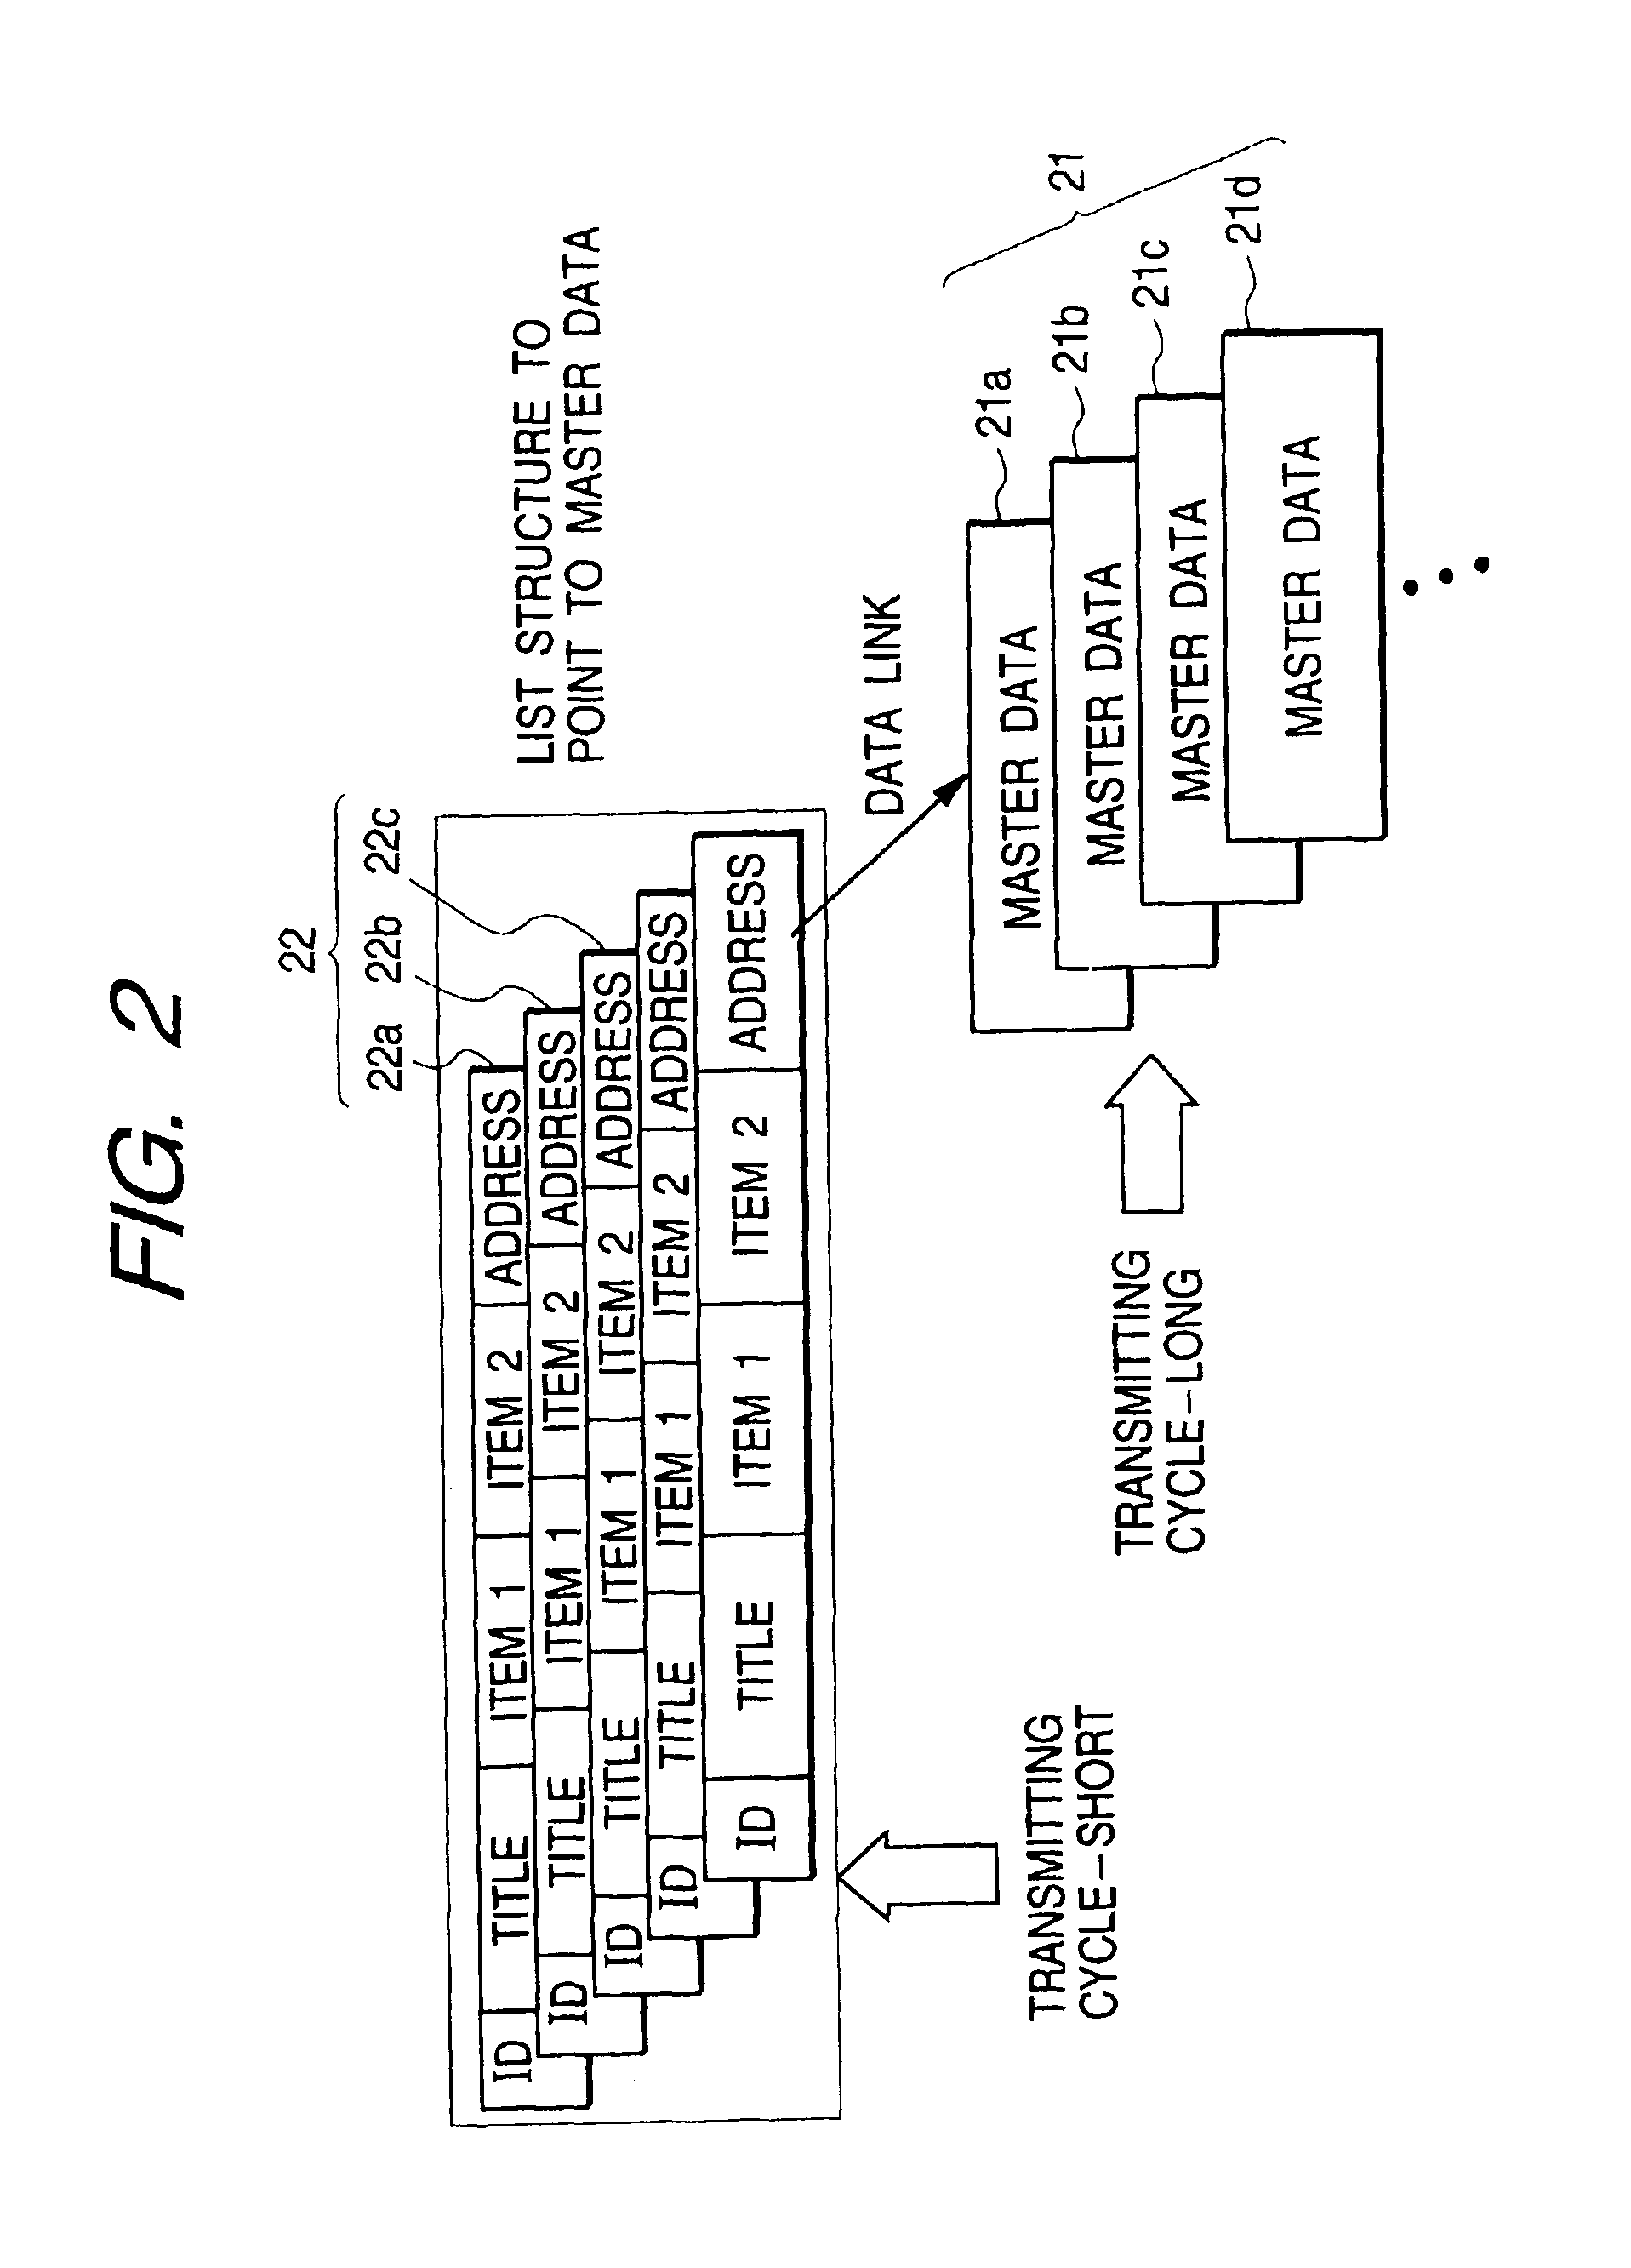 Program information broadcasting system, broadcasting device, and receiving terminal unit